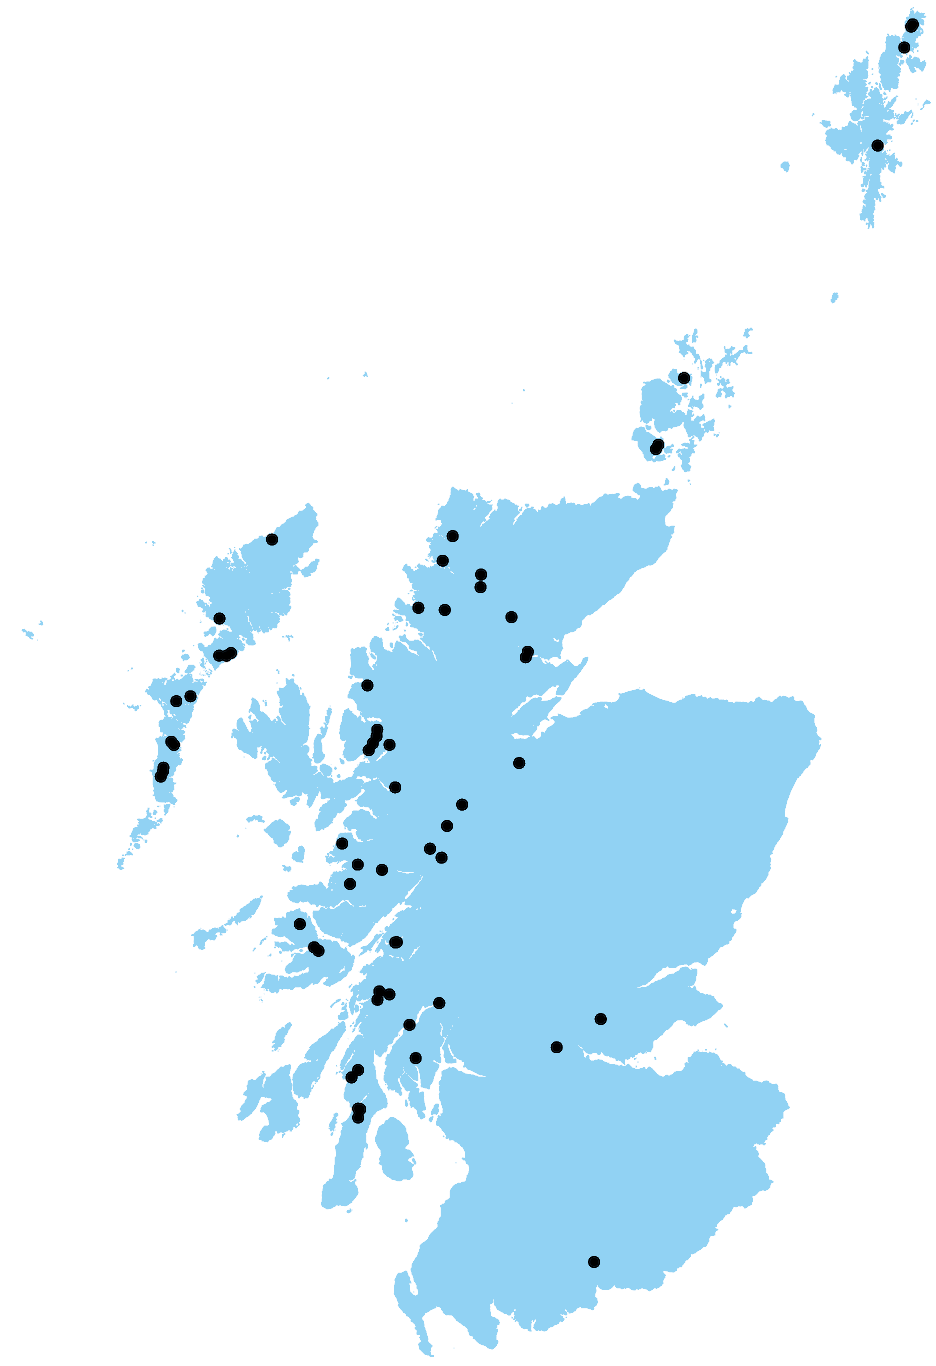 Figure 2: The distribution of active Atlantic salmon smolt sites in 2018